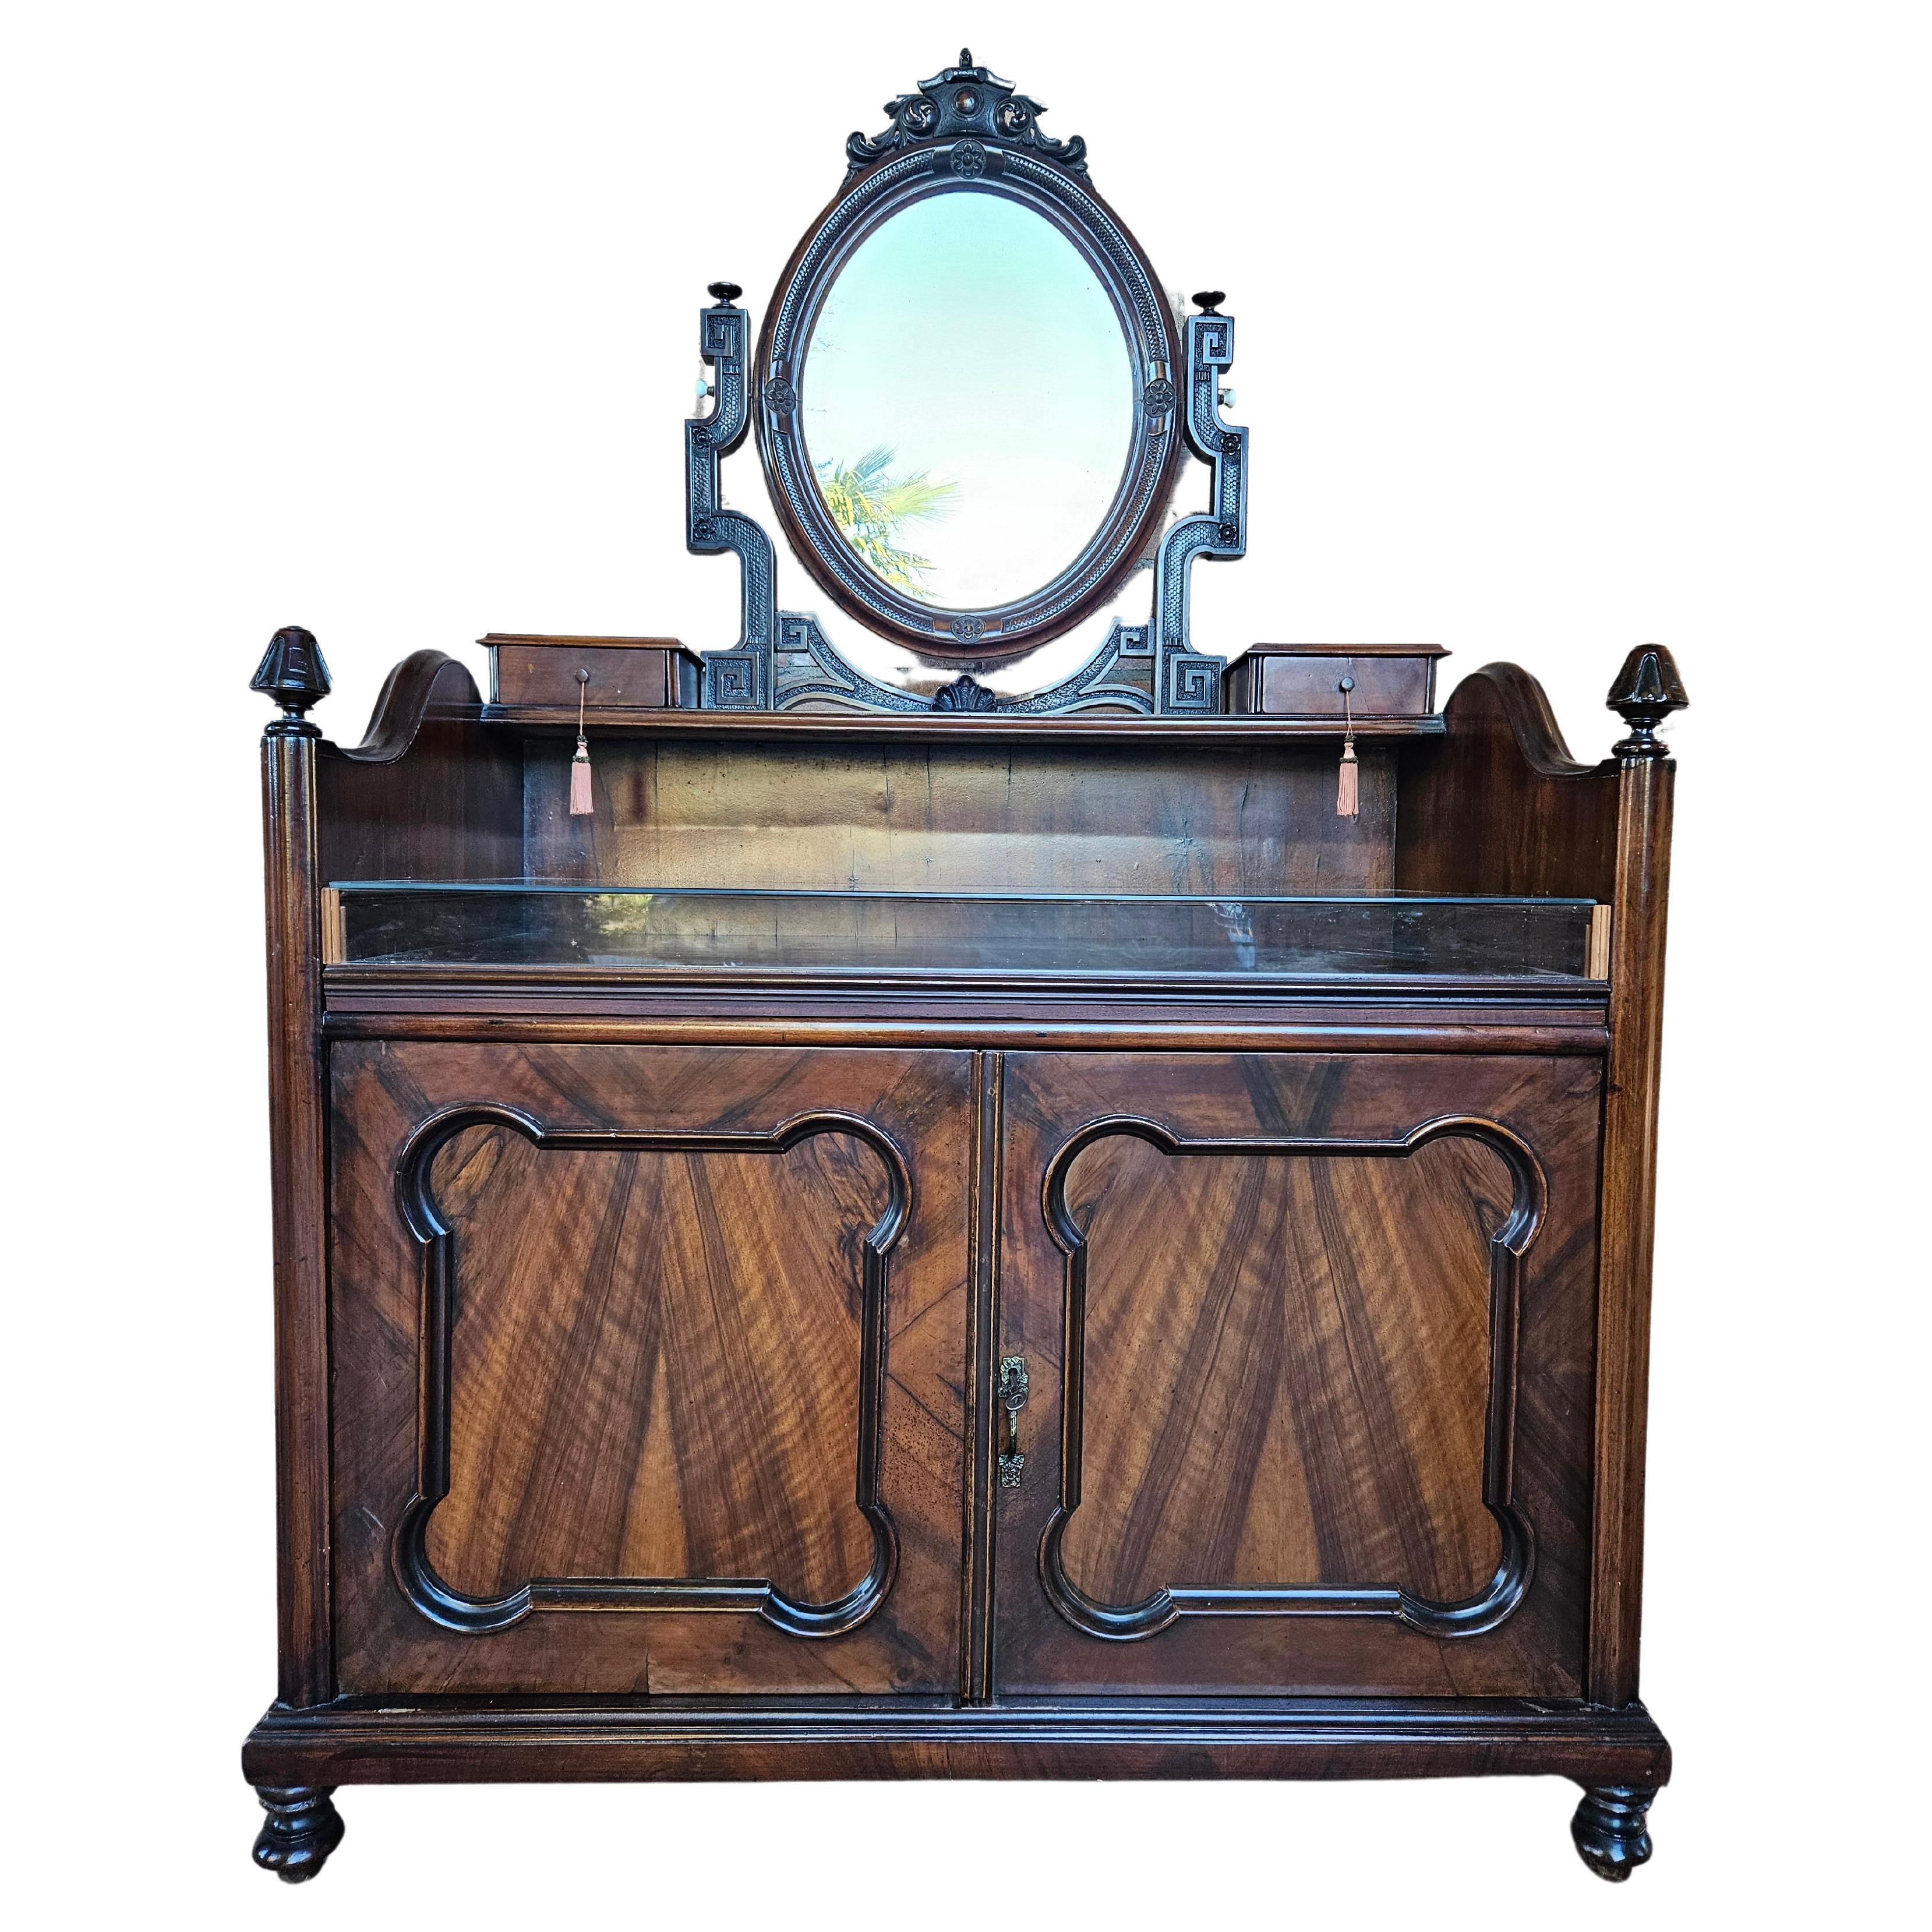 Mahogany sideboard with glass display and revolving mirror late 19th century For Sale